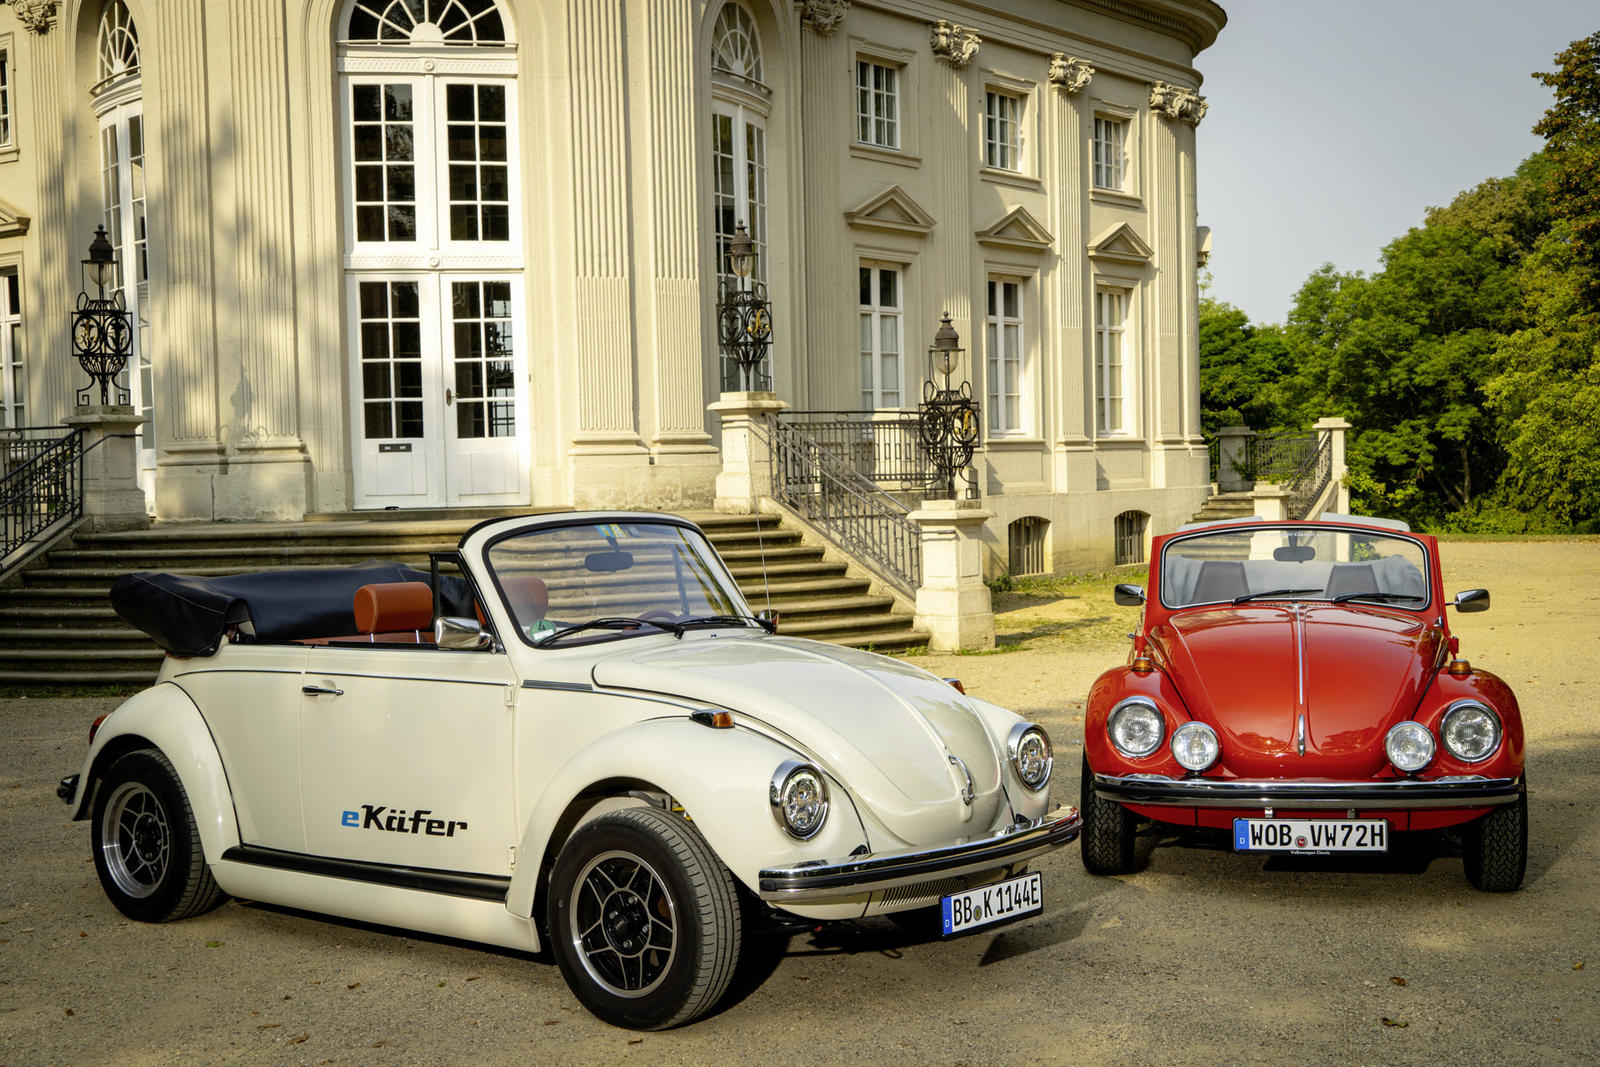 The e-Beetle and a red Beetle with boxer engine